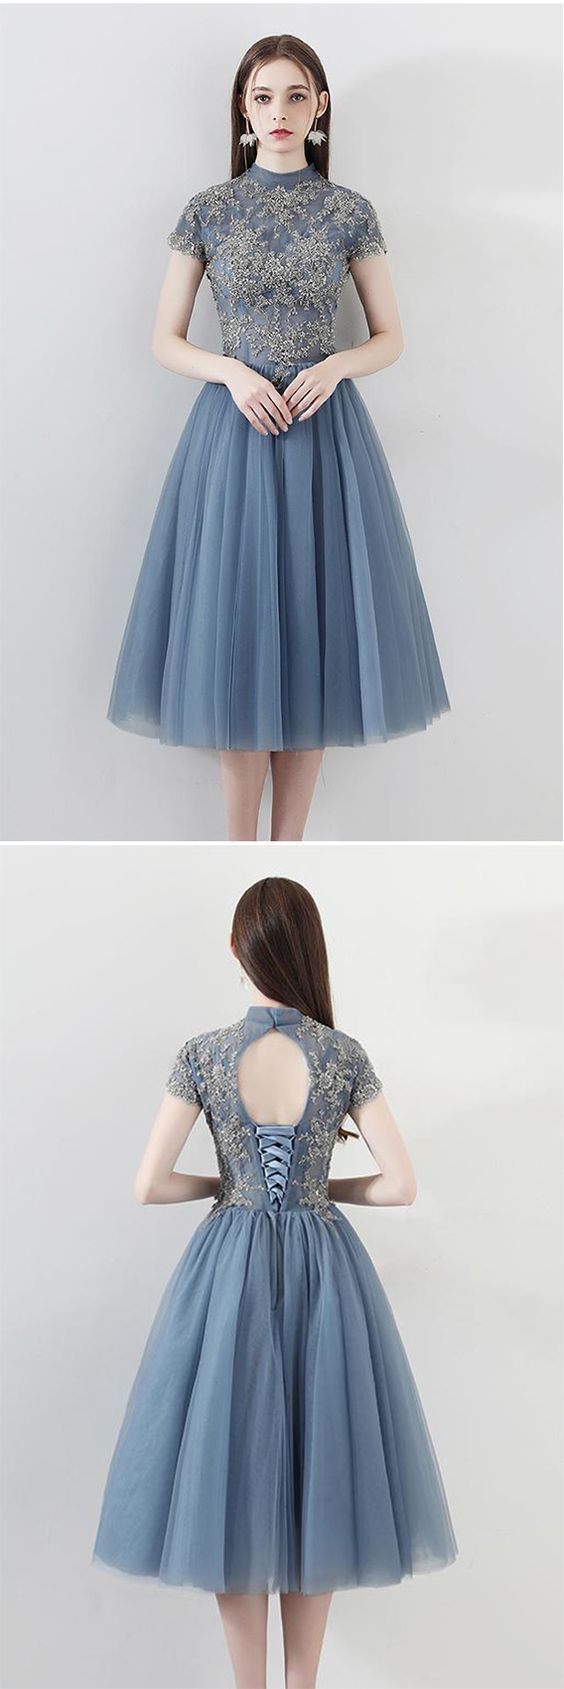 A Line Homecoming Dresses Lillianna Blue Tulle Short Sleeves High Neck Appliques CD810